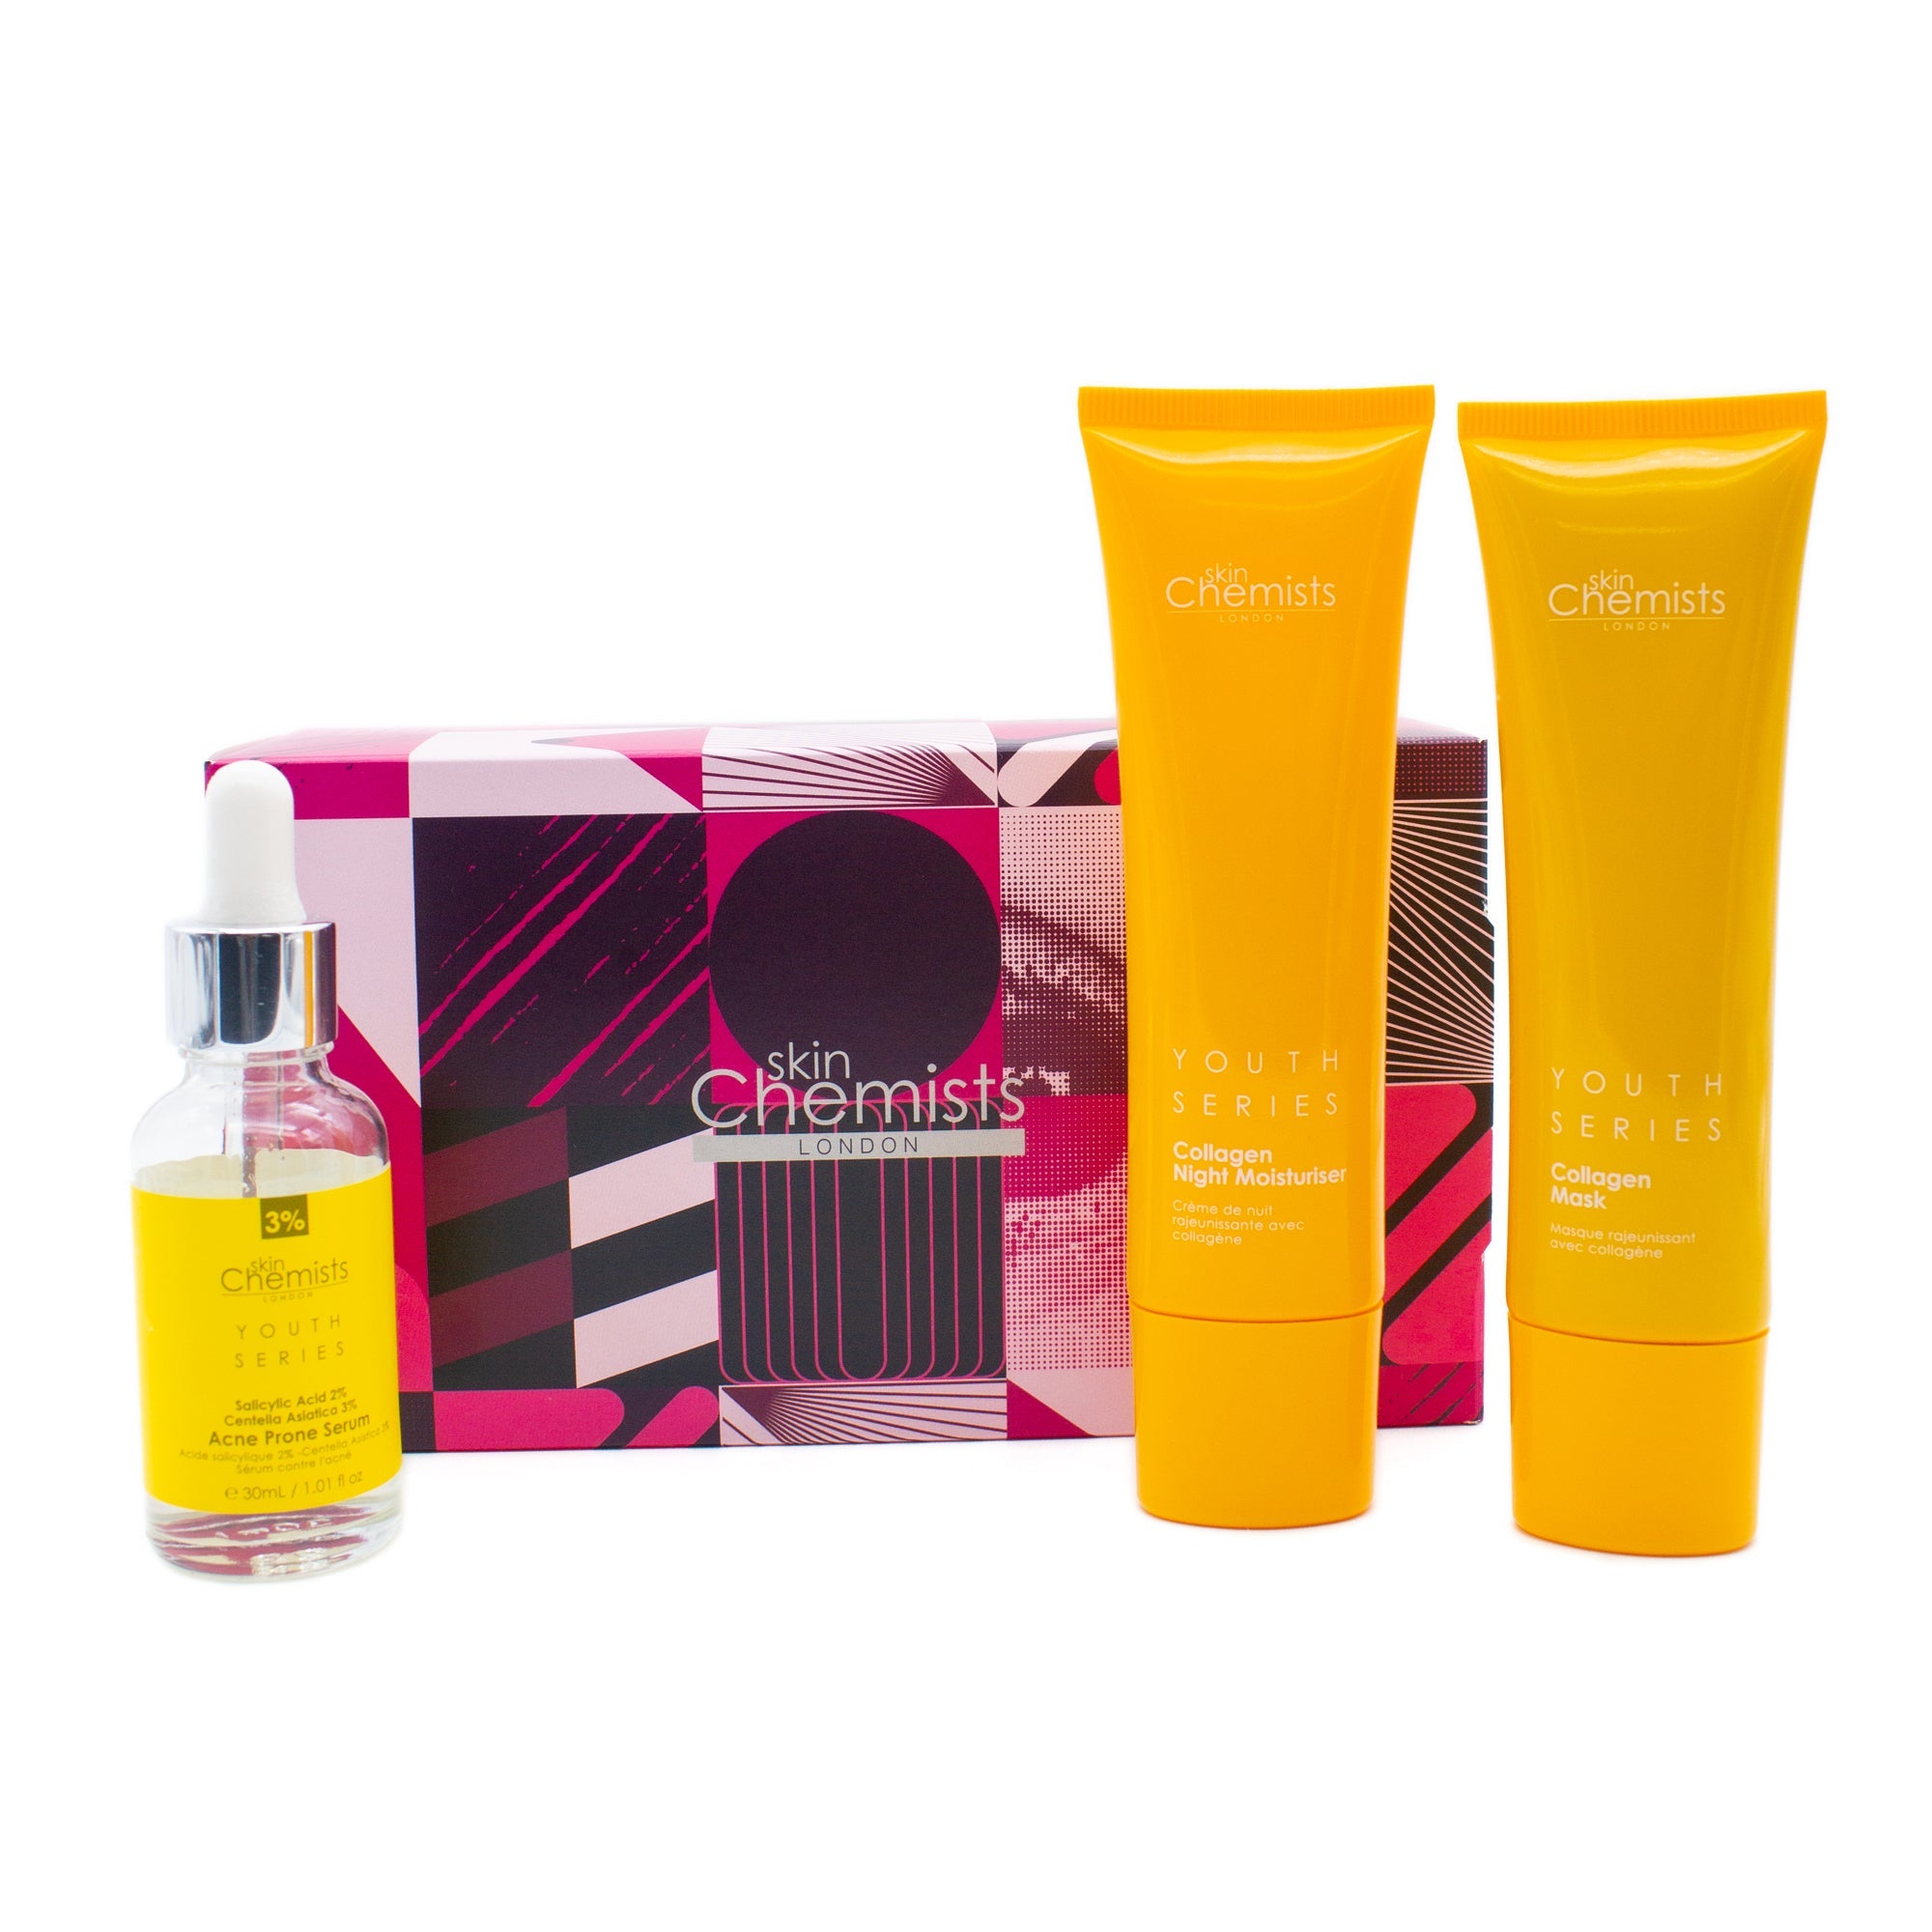 Youth Series Collagen Acne Prone Gift Set